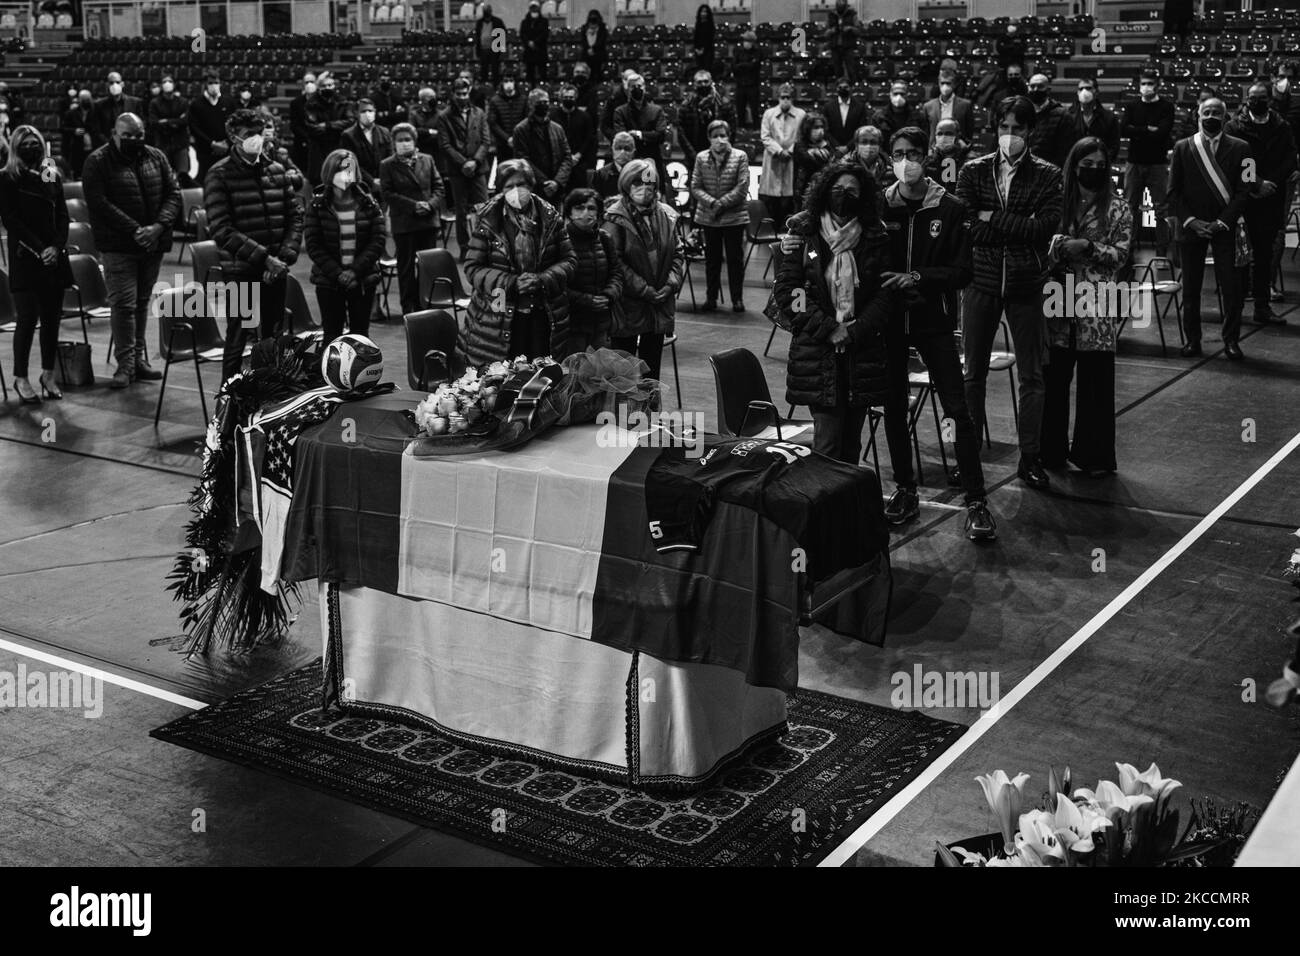 (EDITOR'S NOTE: Image was converted to black an white) In the picture Michele Pasinato's coffin in the Kioene Arena with the family in the background with Silvia, Giorgio and Edoardo. The funeral of the volleyball player of the Italian national team, Michele Pasinato, struck down at the age of 52 by a tumor, took place today in Padua at the Kioene Arena. His teammates Martinelli, Zorzi, Lucchetta and Velasco are present. The city of Padua, where he coached the youth volleyball team, has tightened around his memory. On April 12, 2021, in Padova, Italy. (Photo by Roberto Silvino/NurPhoto) Stock Photo